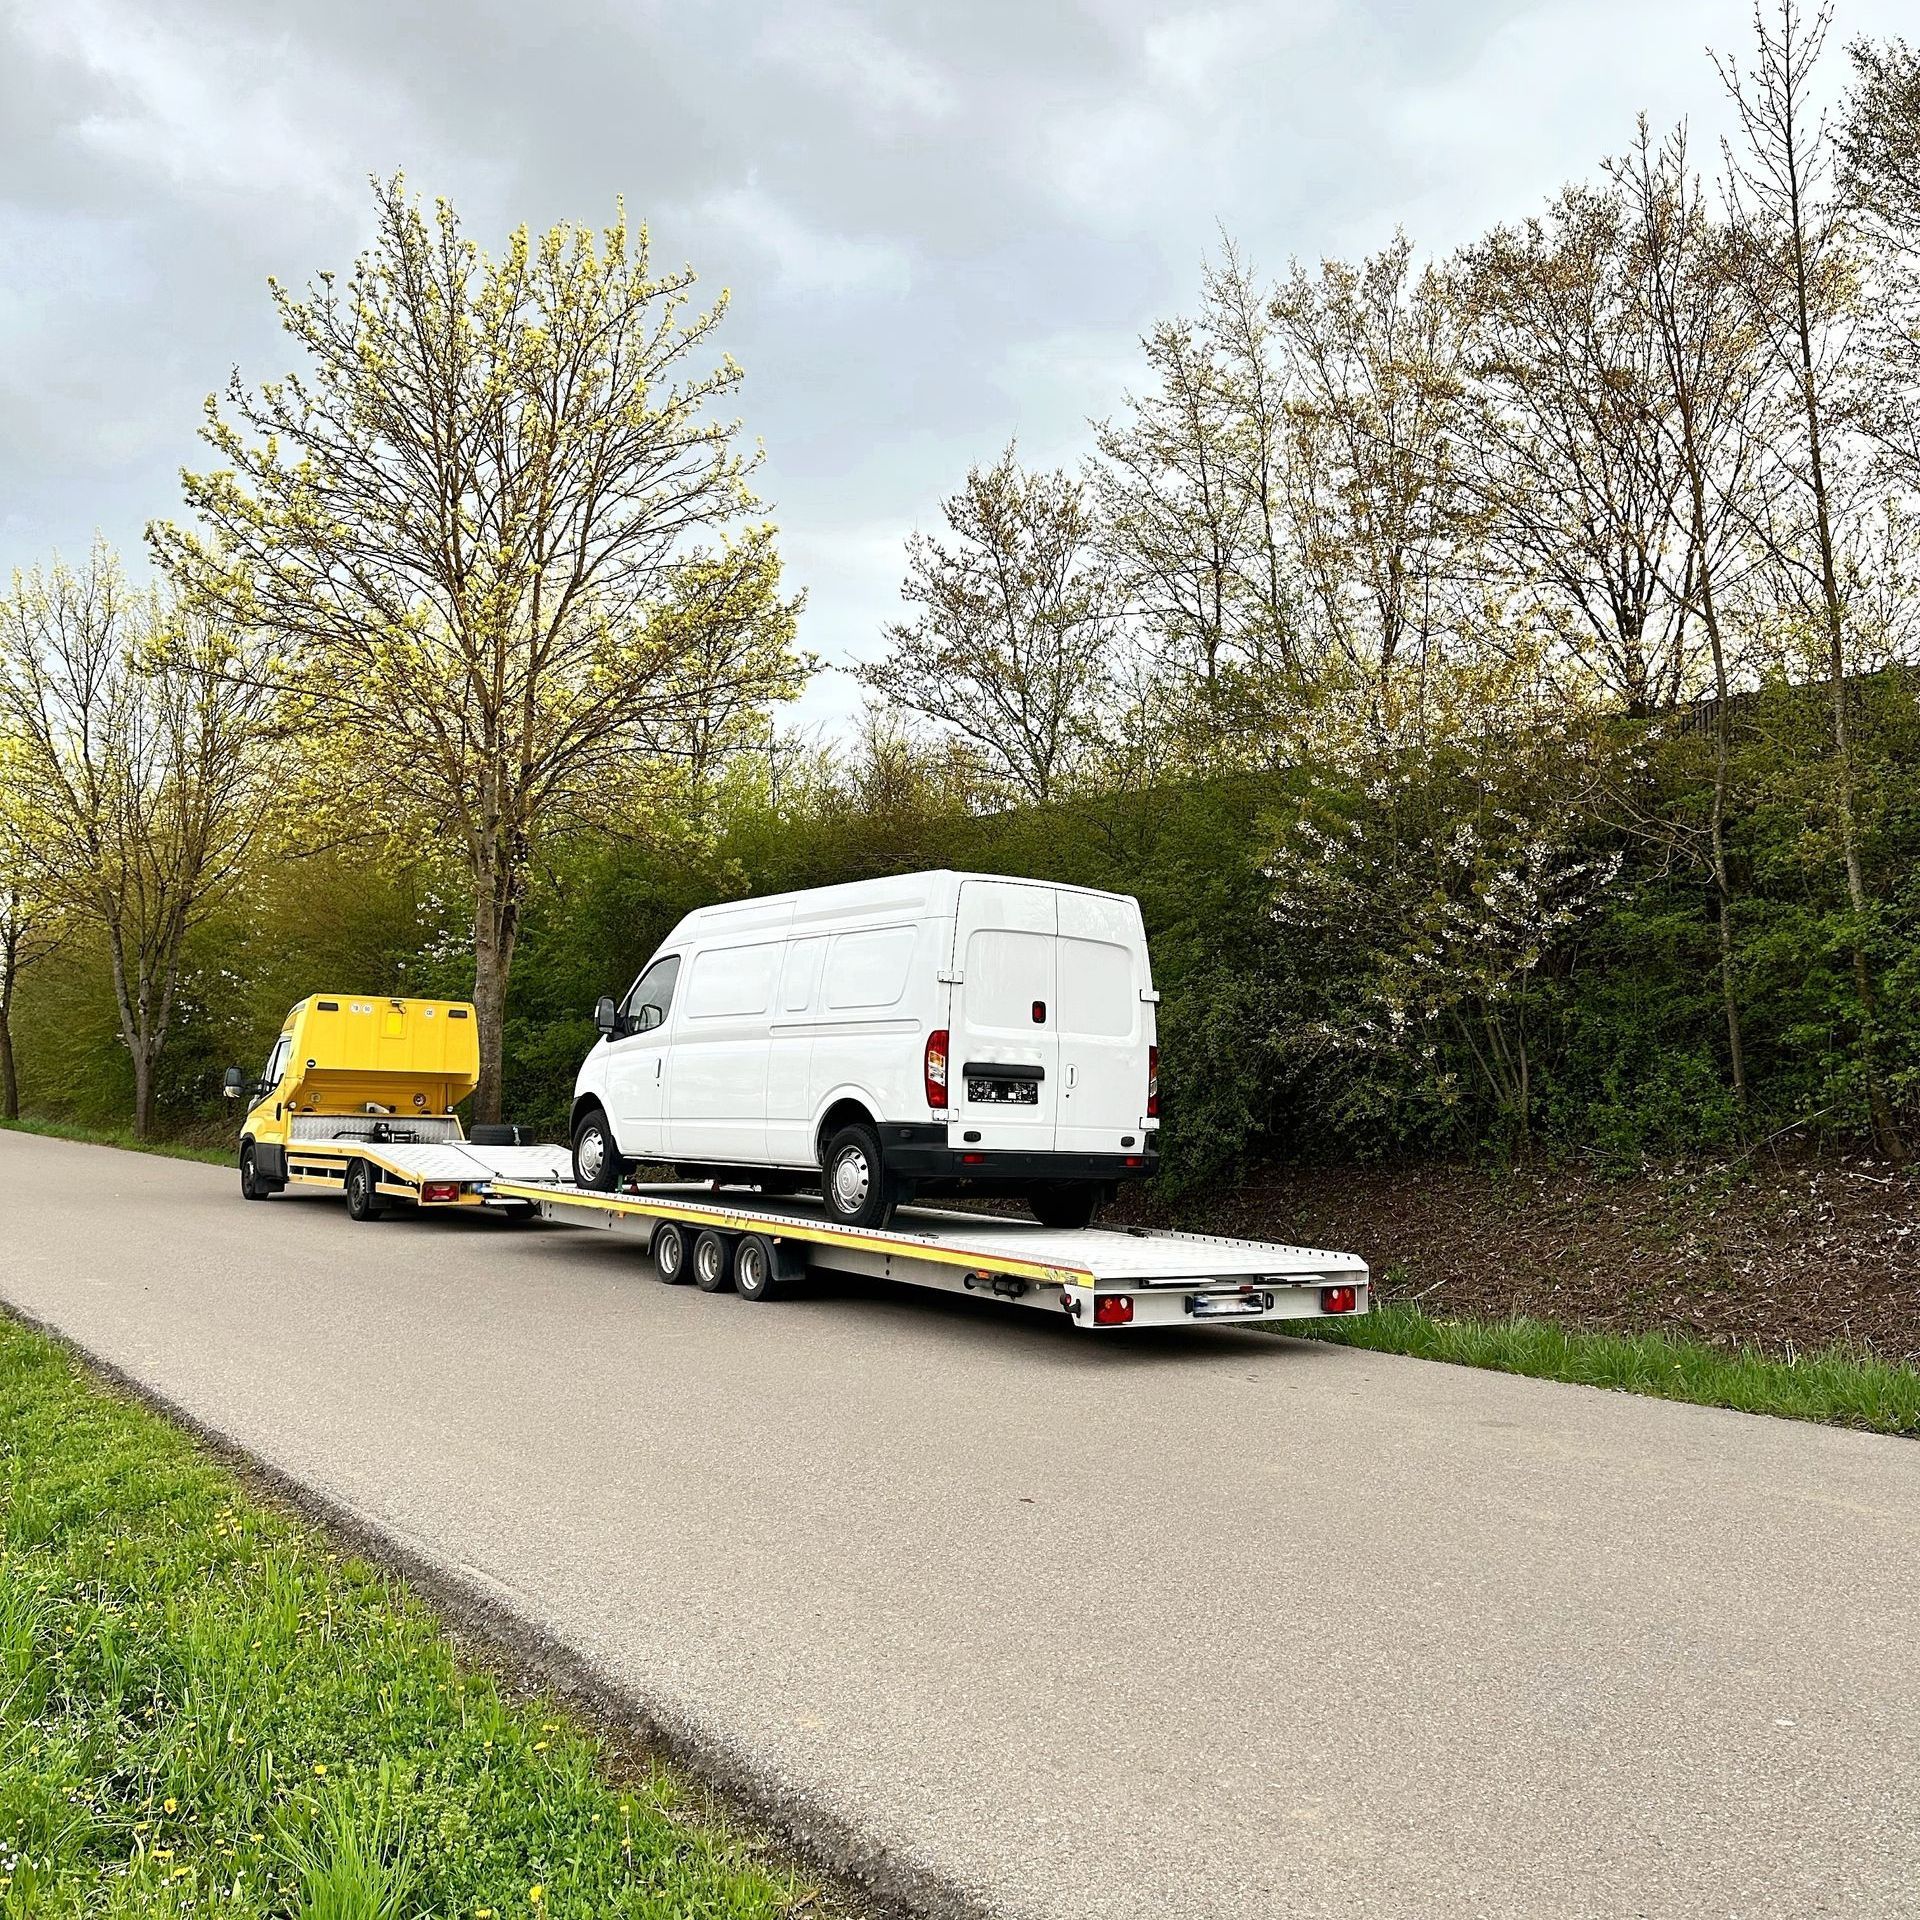 A white van is being towed down a road by a yellow truck.